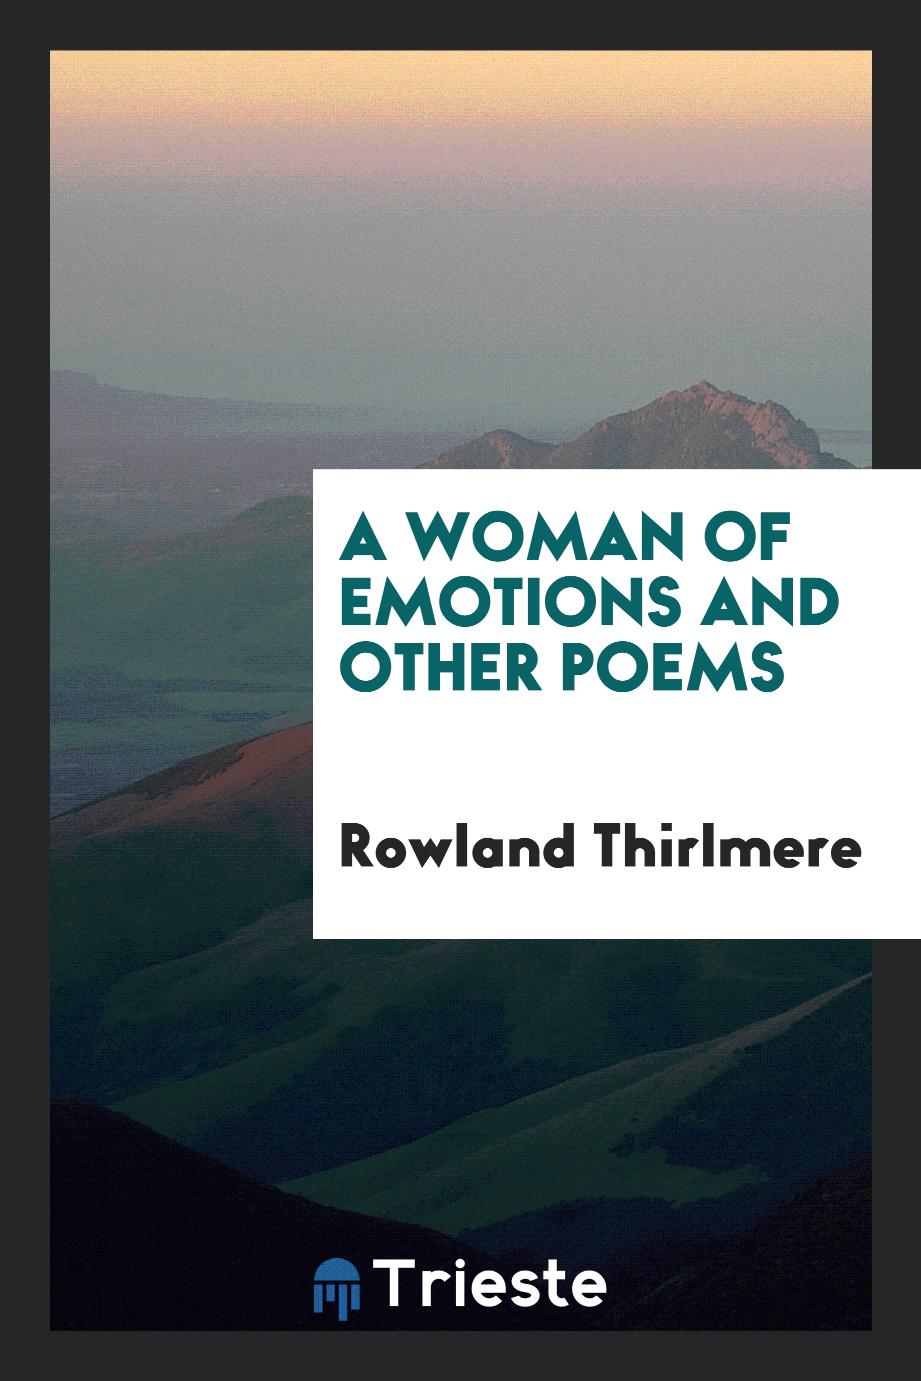 A woman of emotions and other poems